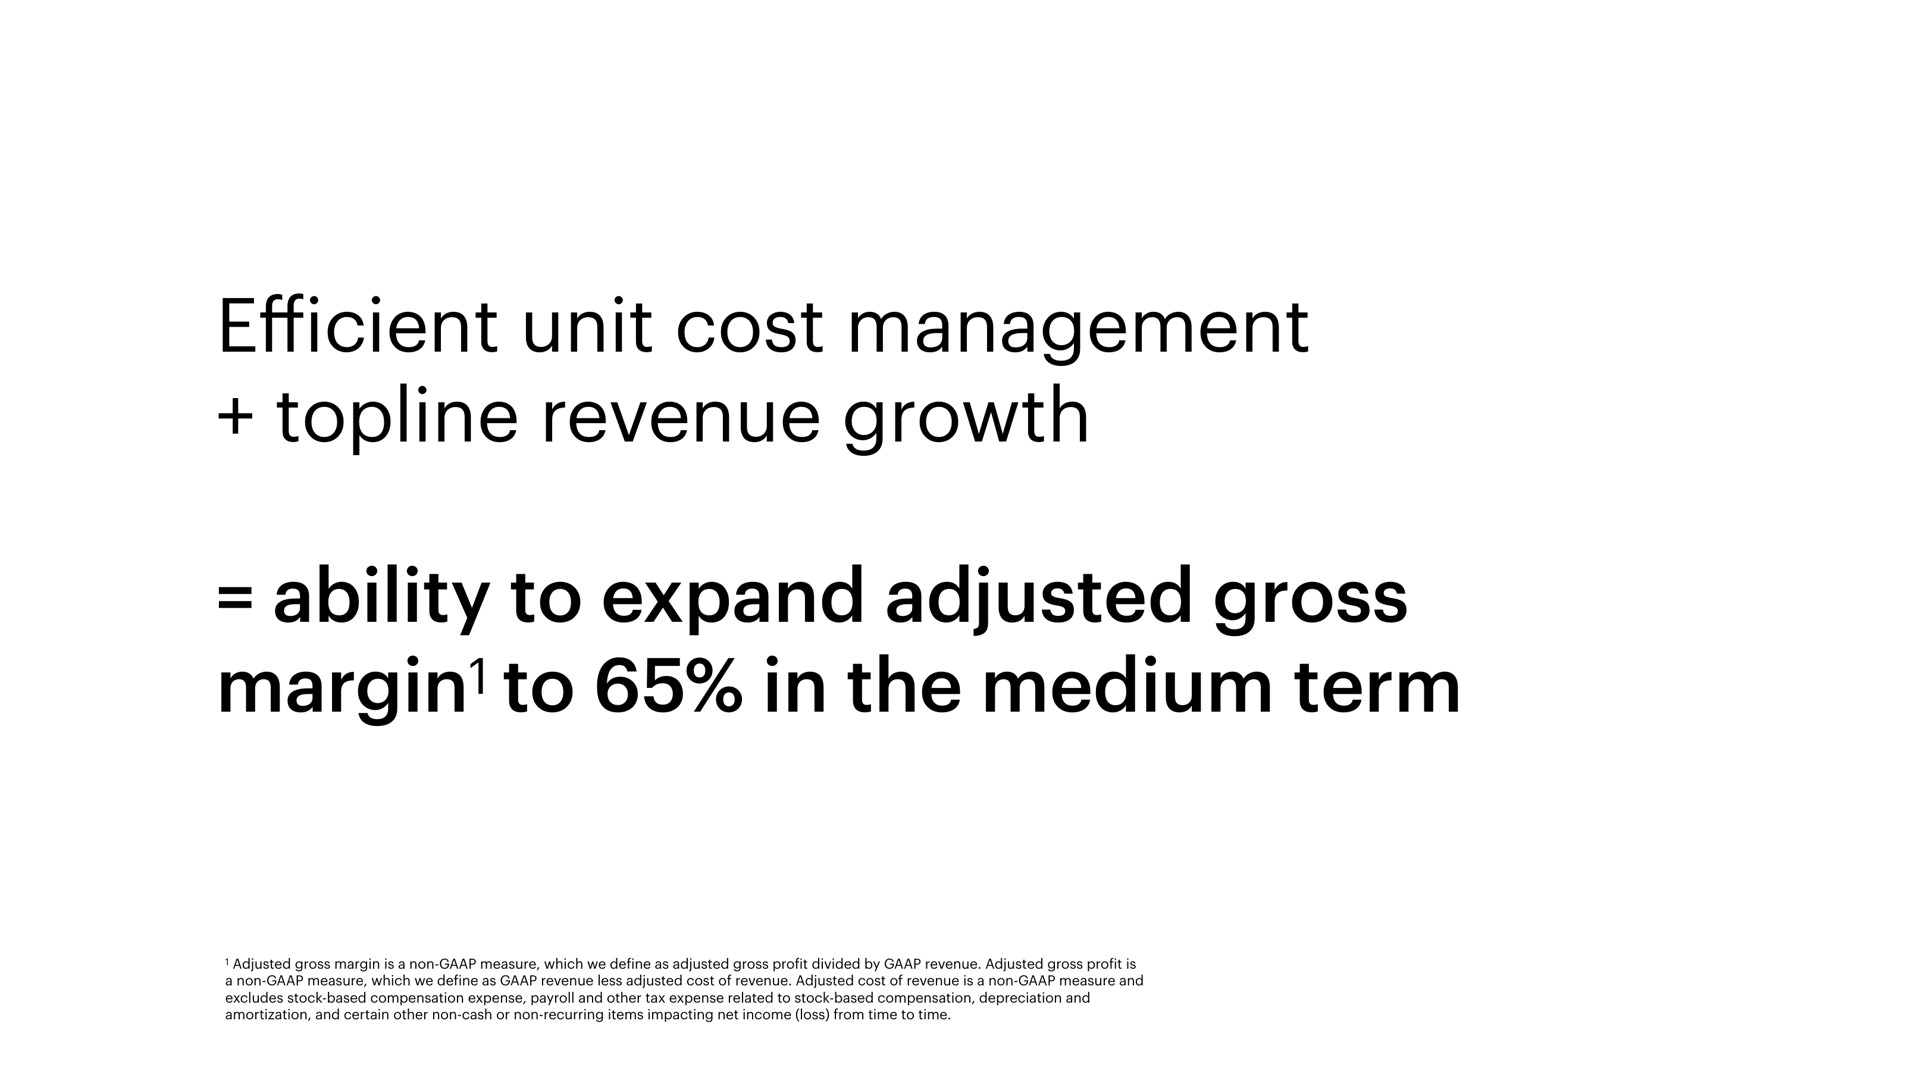 efficient unit cost management topline revenue growth ability to expand adjusted gross margin to in the medium term margin | Snap Inc